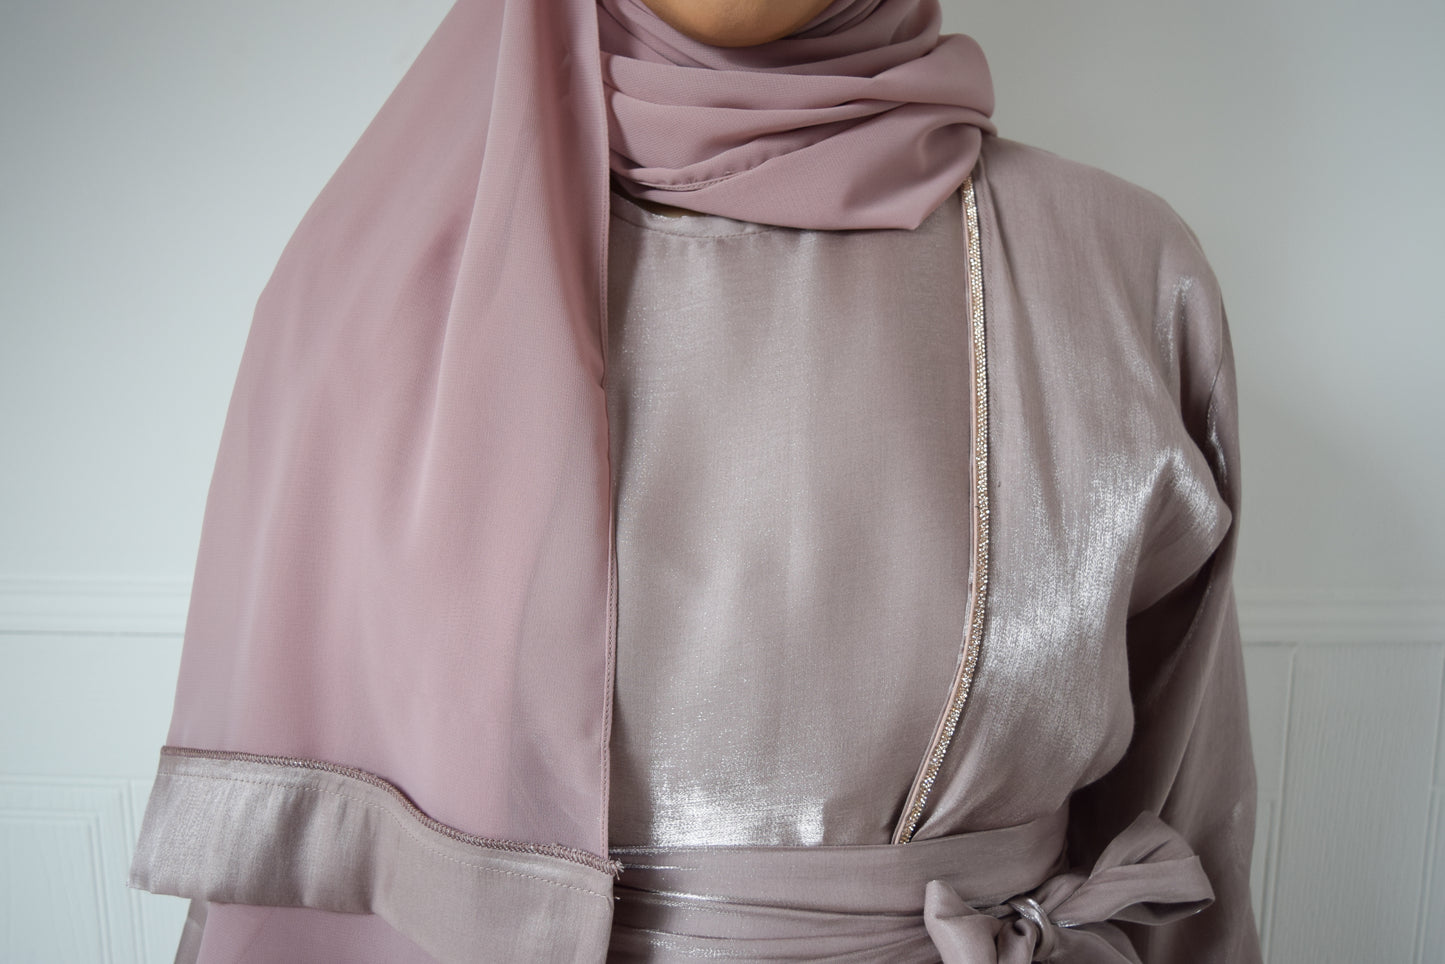 Malak Twin abaya set in shimmer Pink and Silver trim